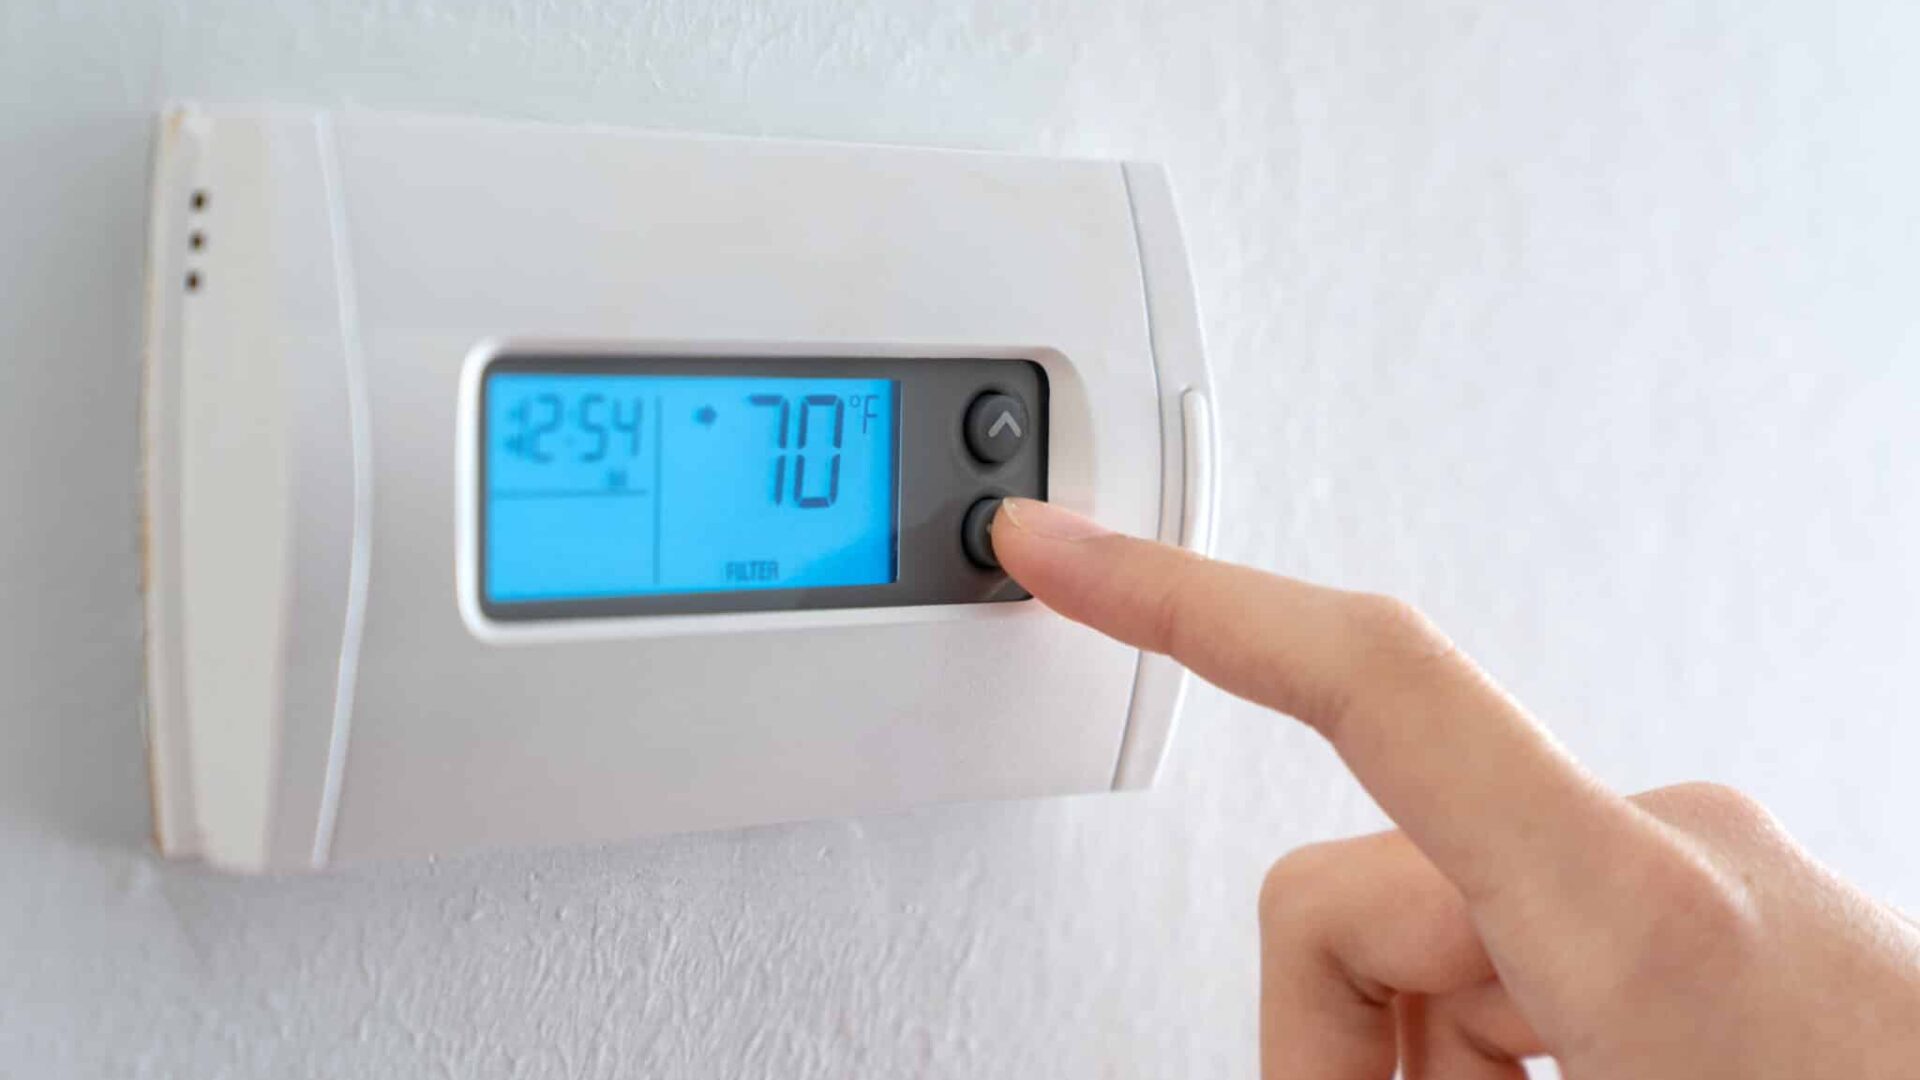 A woman is pressing the down button of a wall attached house thermostat with digital display showing temperature 70 degree Fahrenheit for heating, cooling, electricity and gas saving